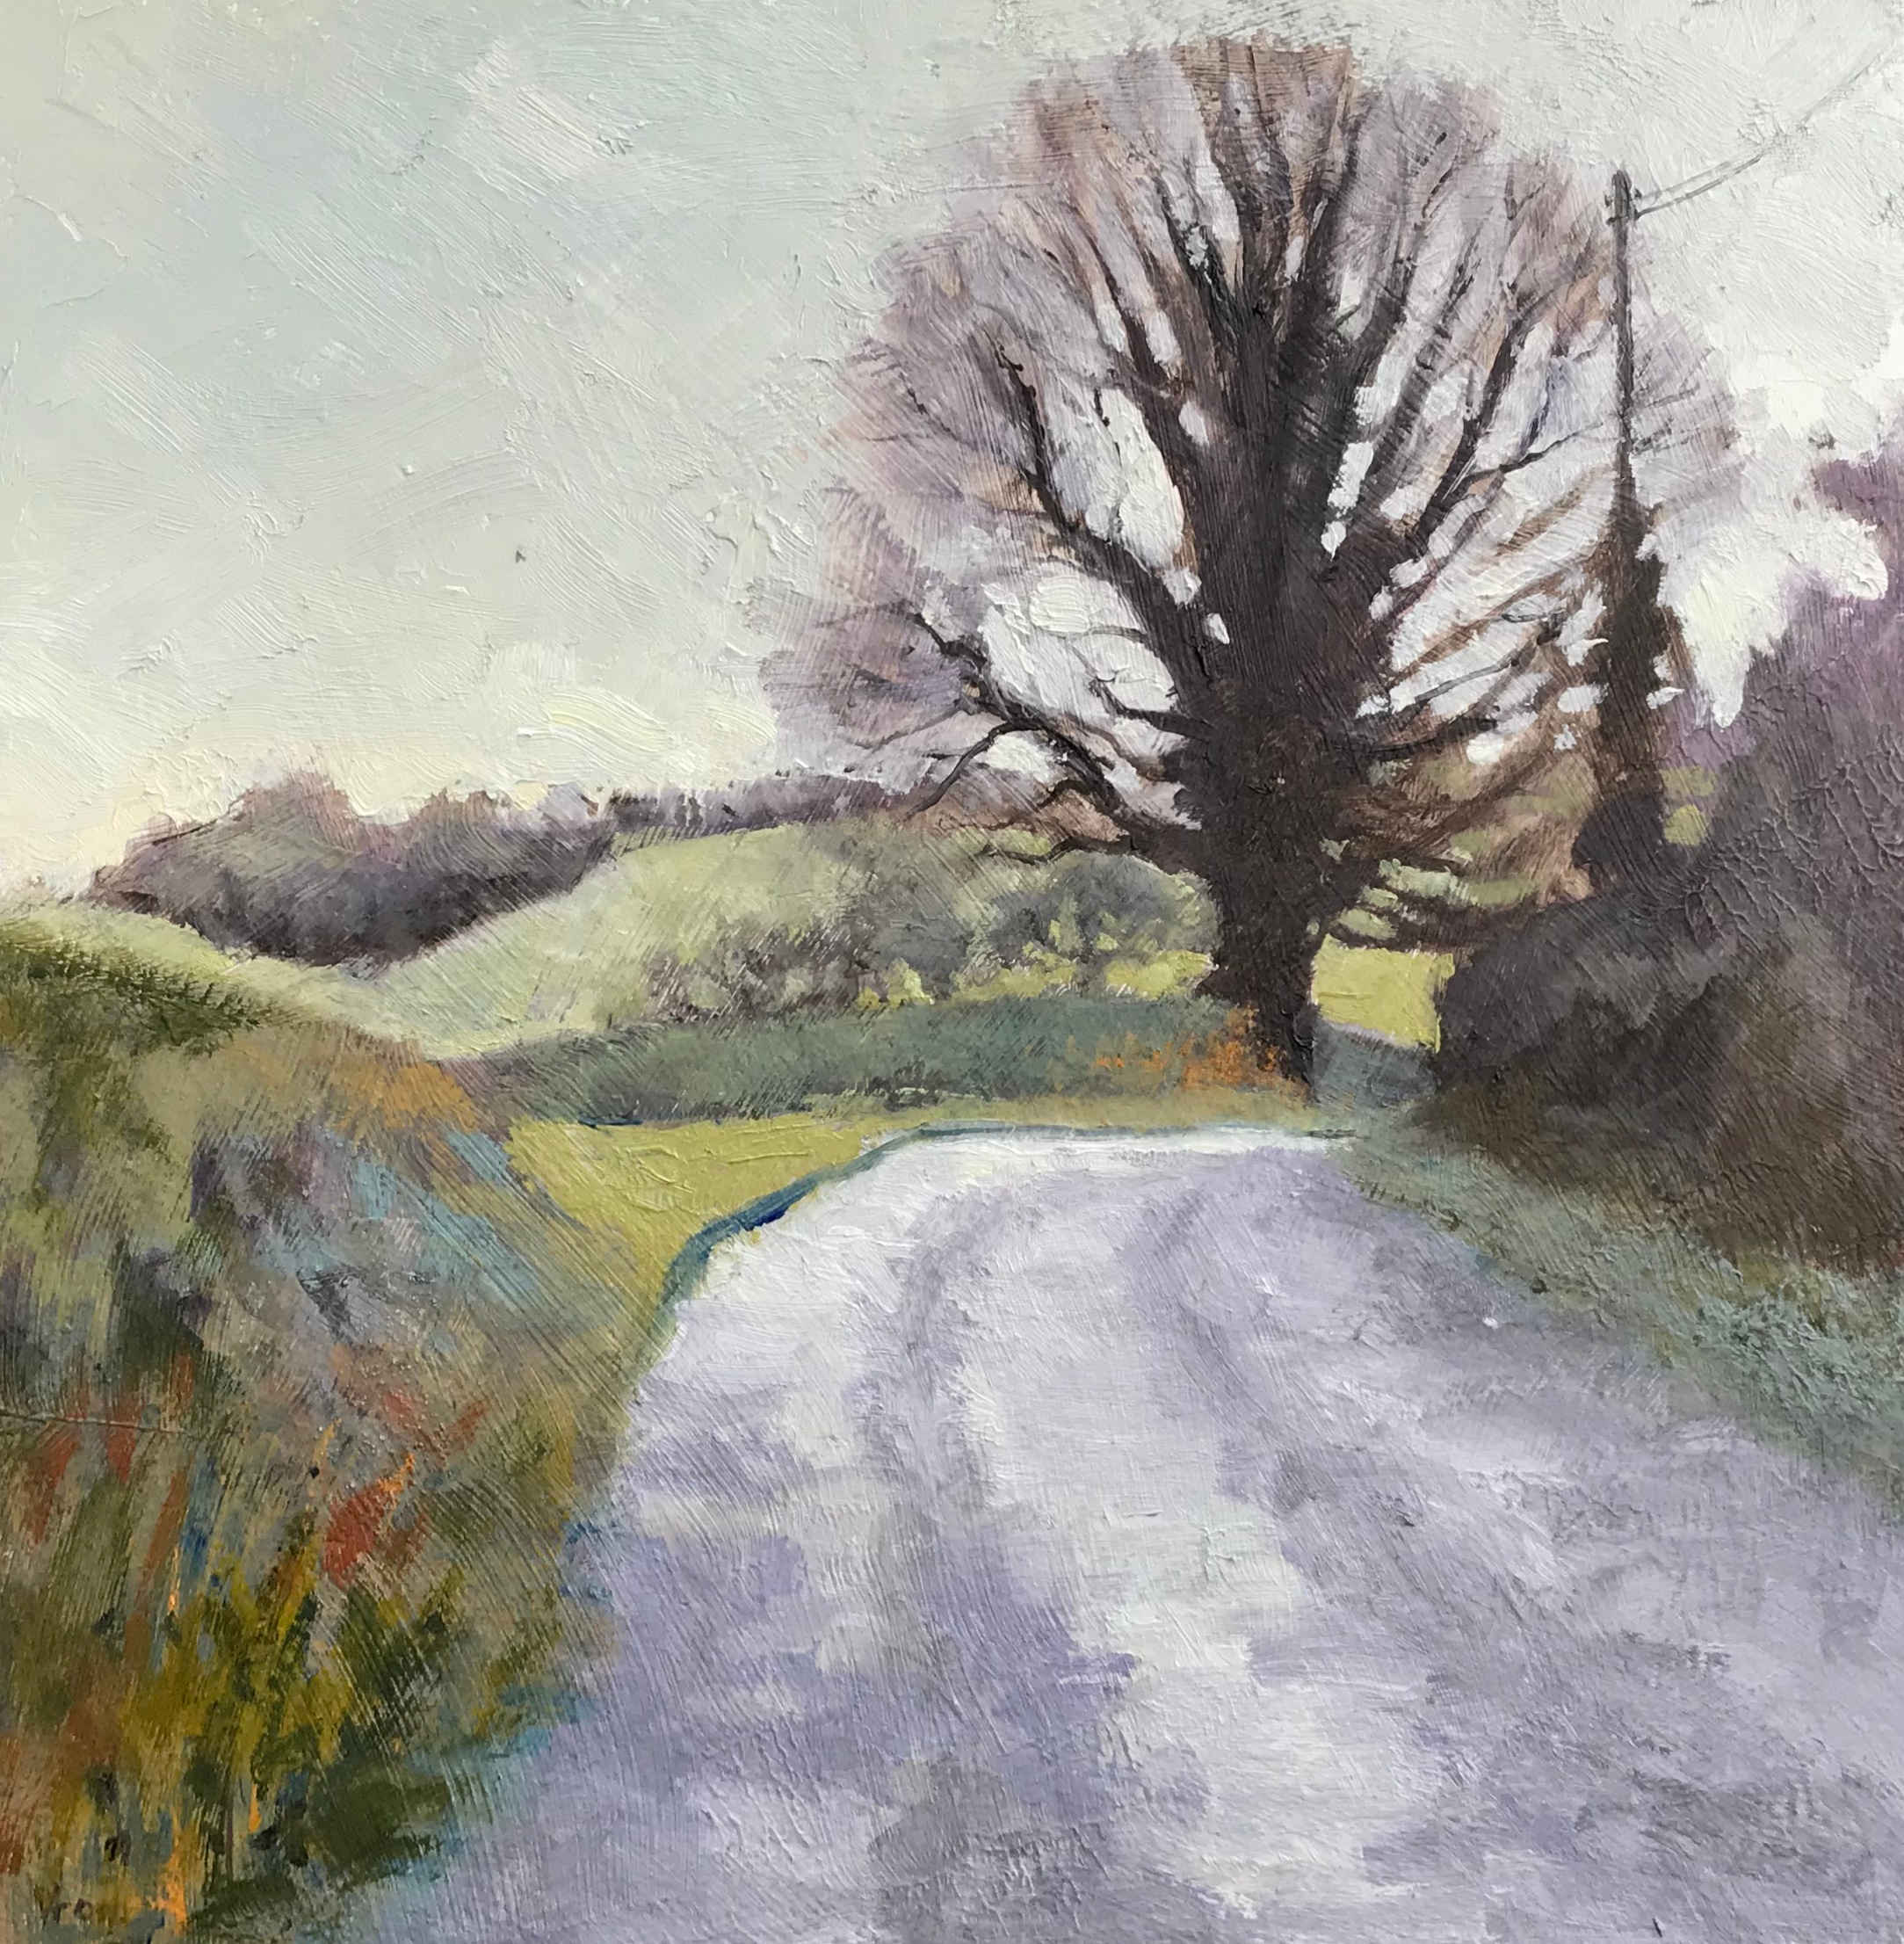 A wet lane in Shropshire